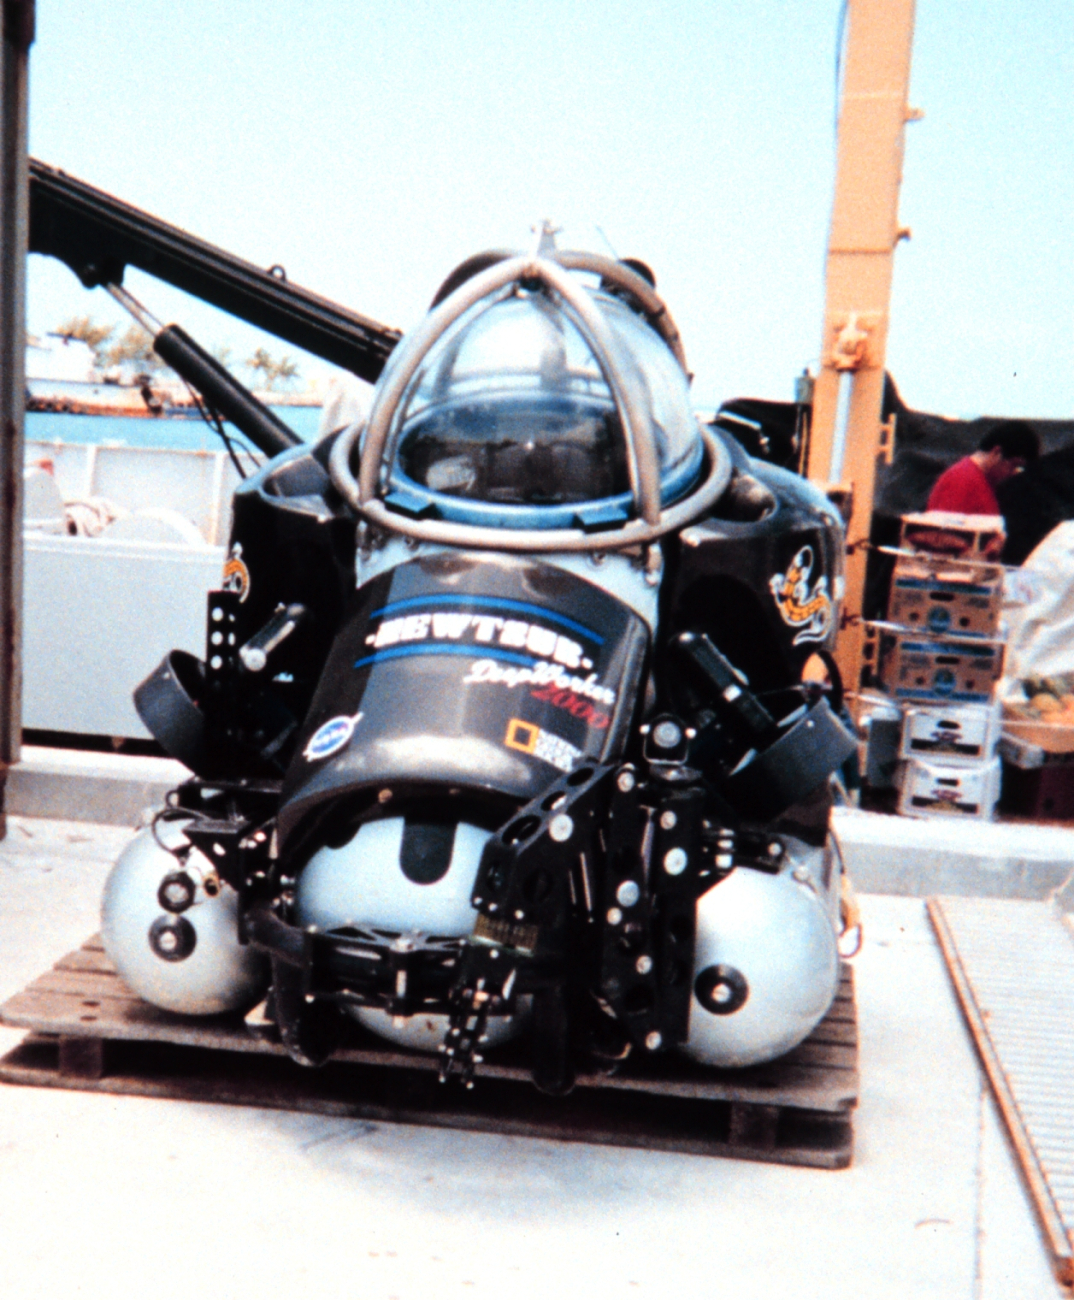 Deep Worker 2000 -- one man mini-sub deployed from McARTHUR during SustainableSeas Expedition